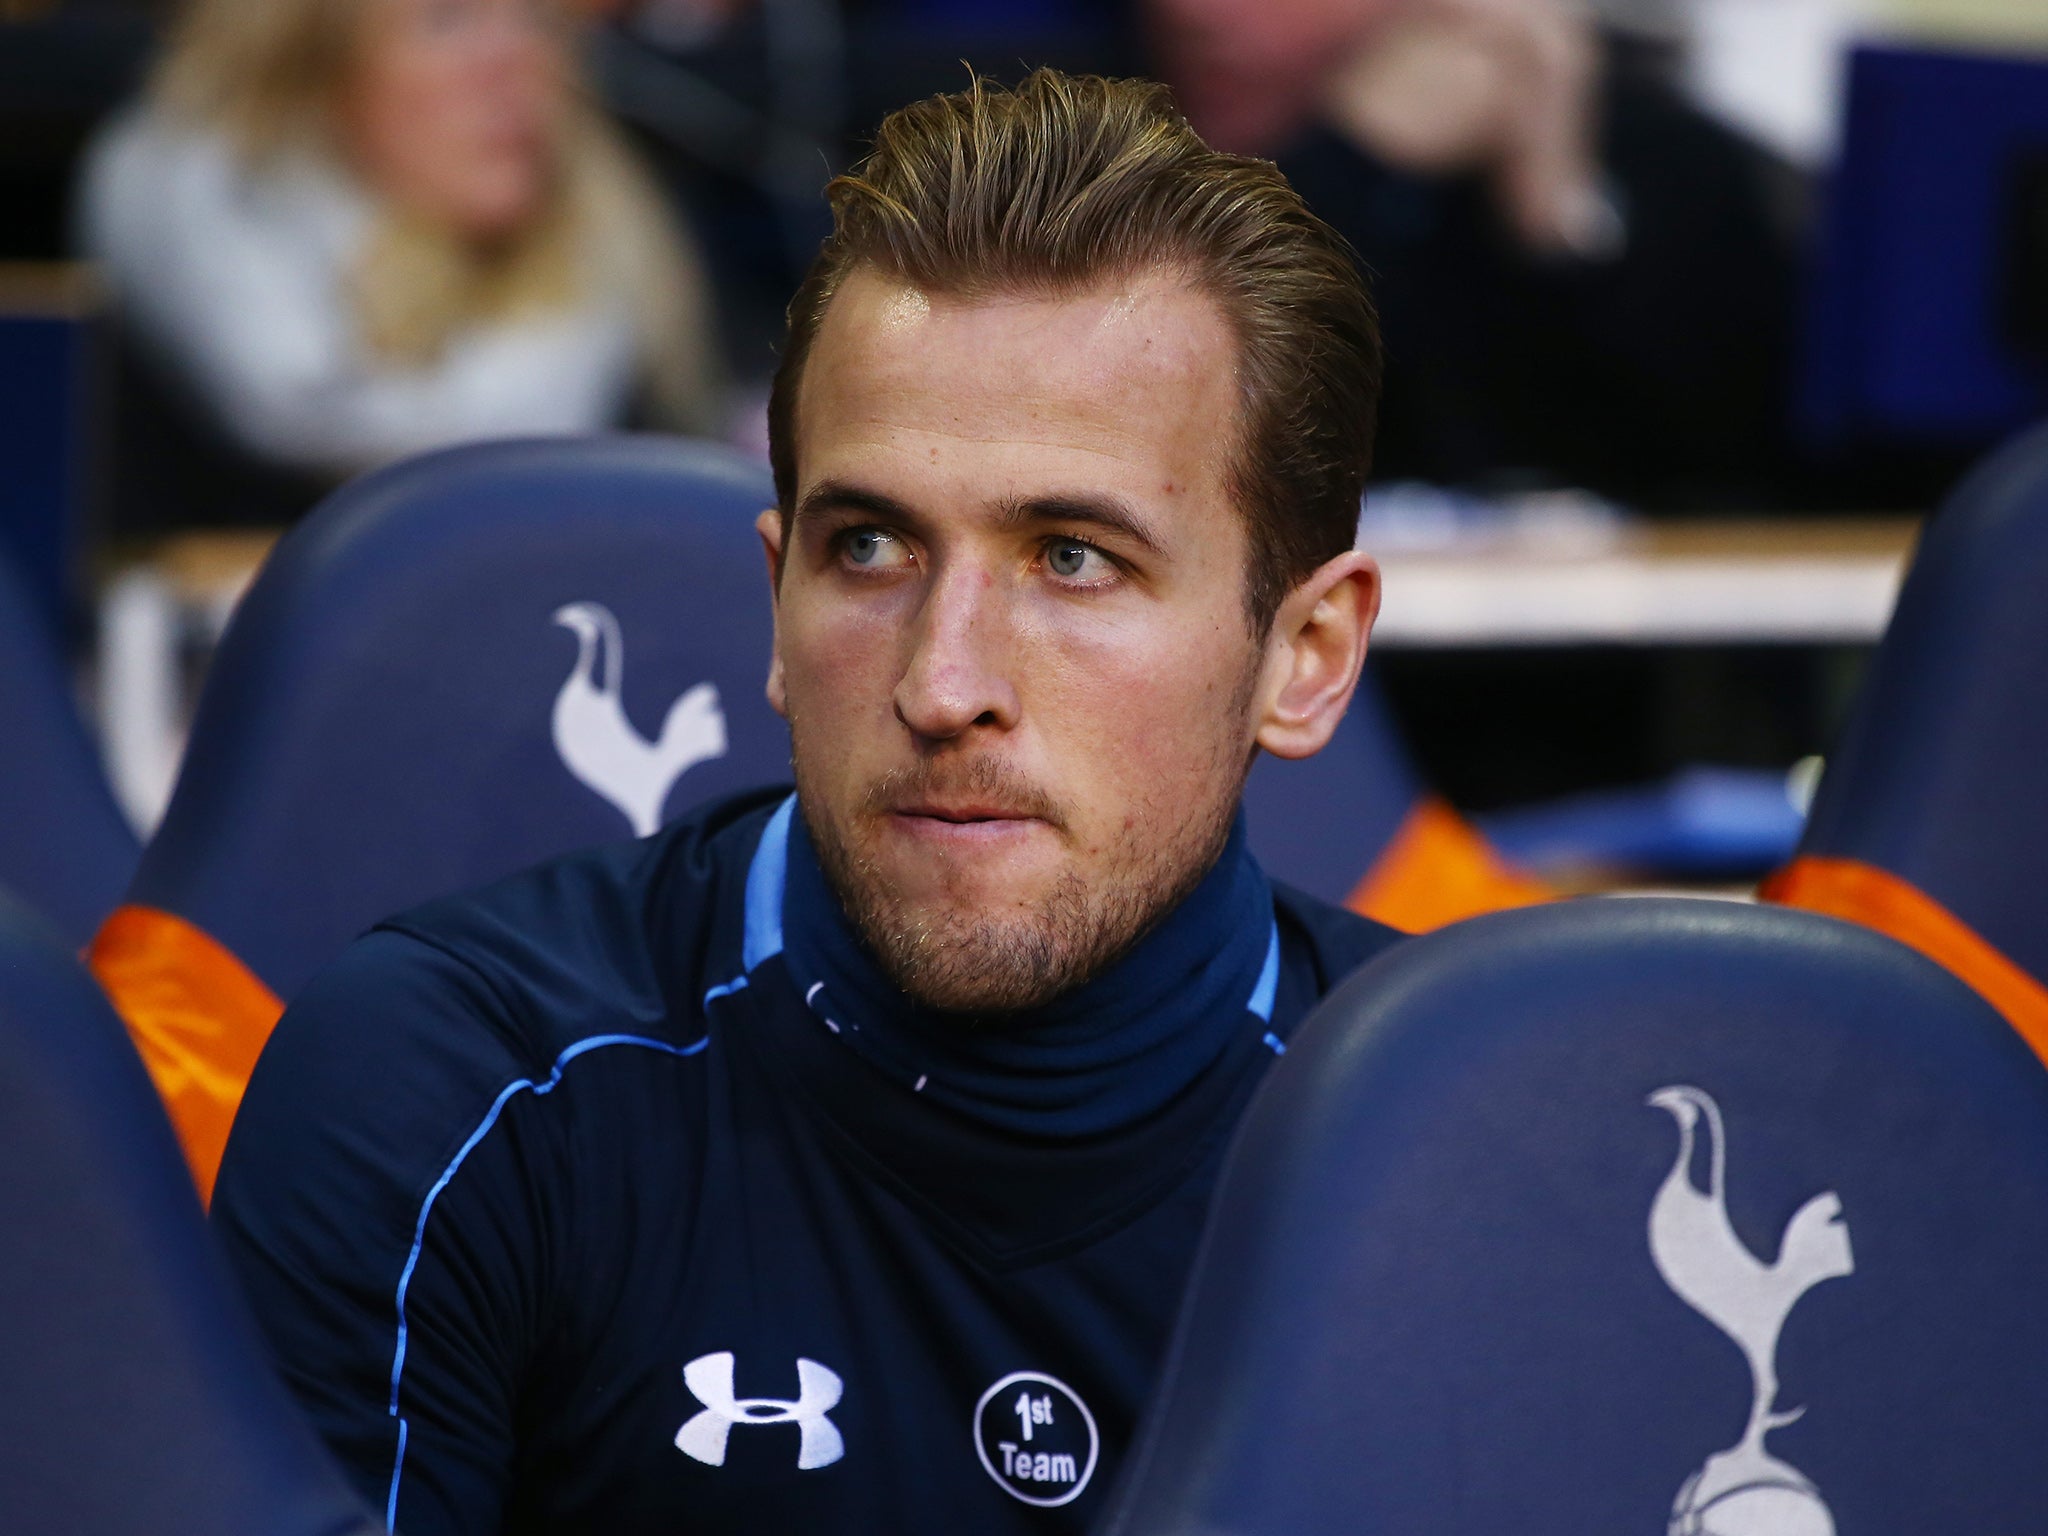 Harry Kane is named among the substitutes for tonight's replay